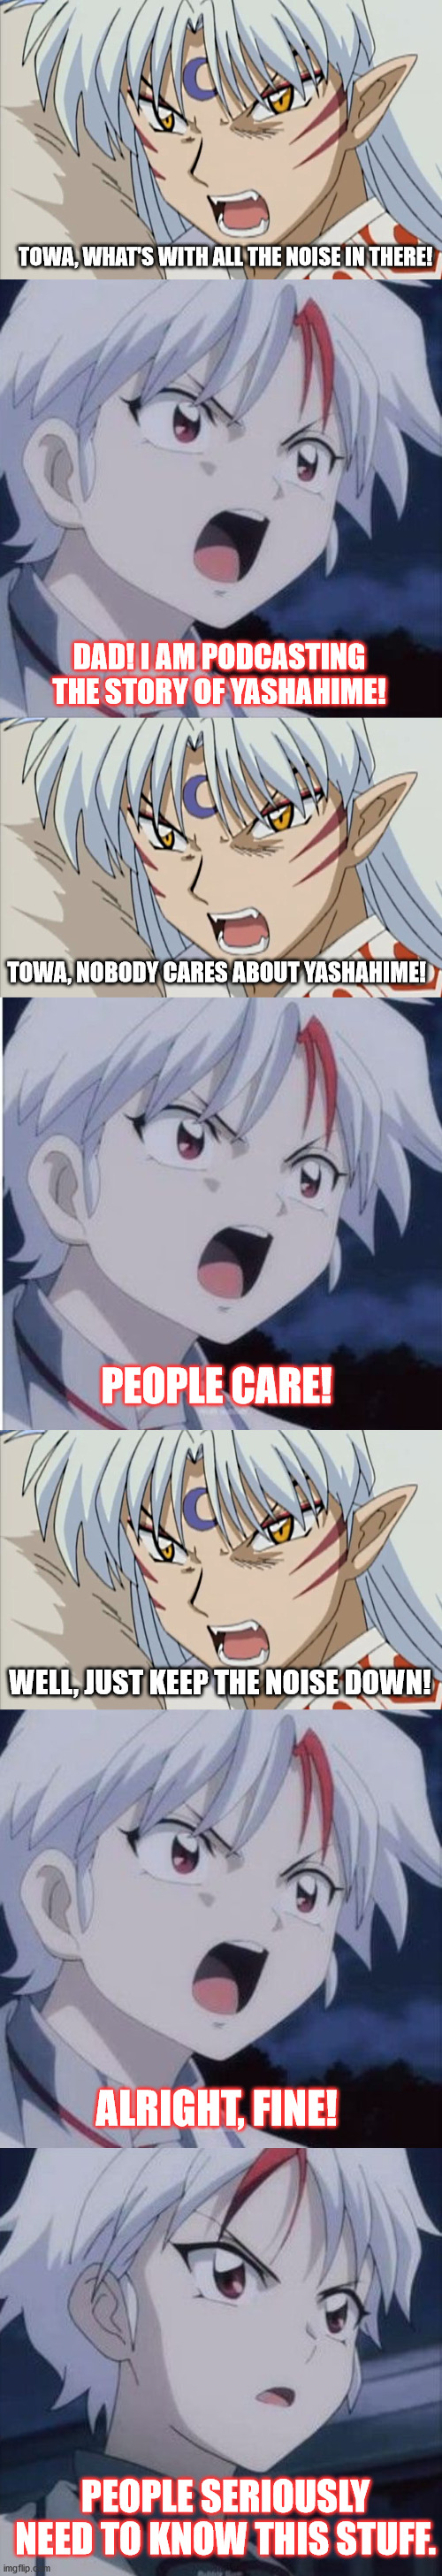 Towa's Pre Podcast | TOWA, WHAT'S WITH ALL THE NOISE IN THERE! DAD! I AM PODCASTING THE STORY OF YASHAHIME! TOWA, NOBODY CARES ABOUT YASHAHIME! PEOPLE CARE! WELL, JUST KEEP THE NOISE DOWN! ALRIGHT, FINE! PEOPLE SERIOUSLY NEED TO KNOW THIS STUFF. | image tagged in inuyasha,yashahime,venture bros,funny,parody,meme | made w/ Imgflip meme maker